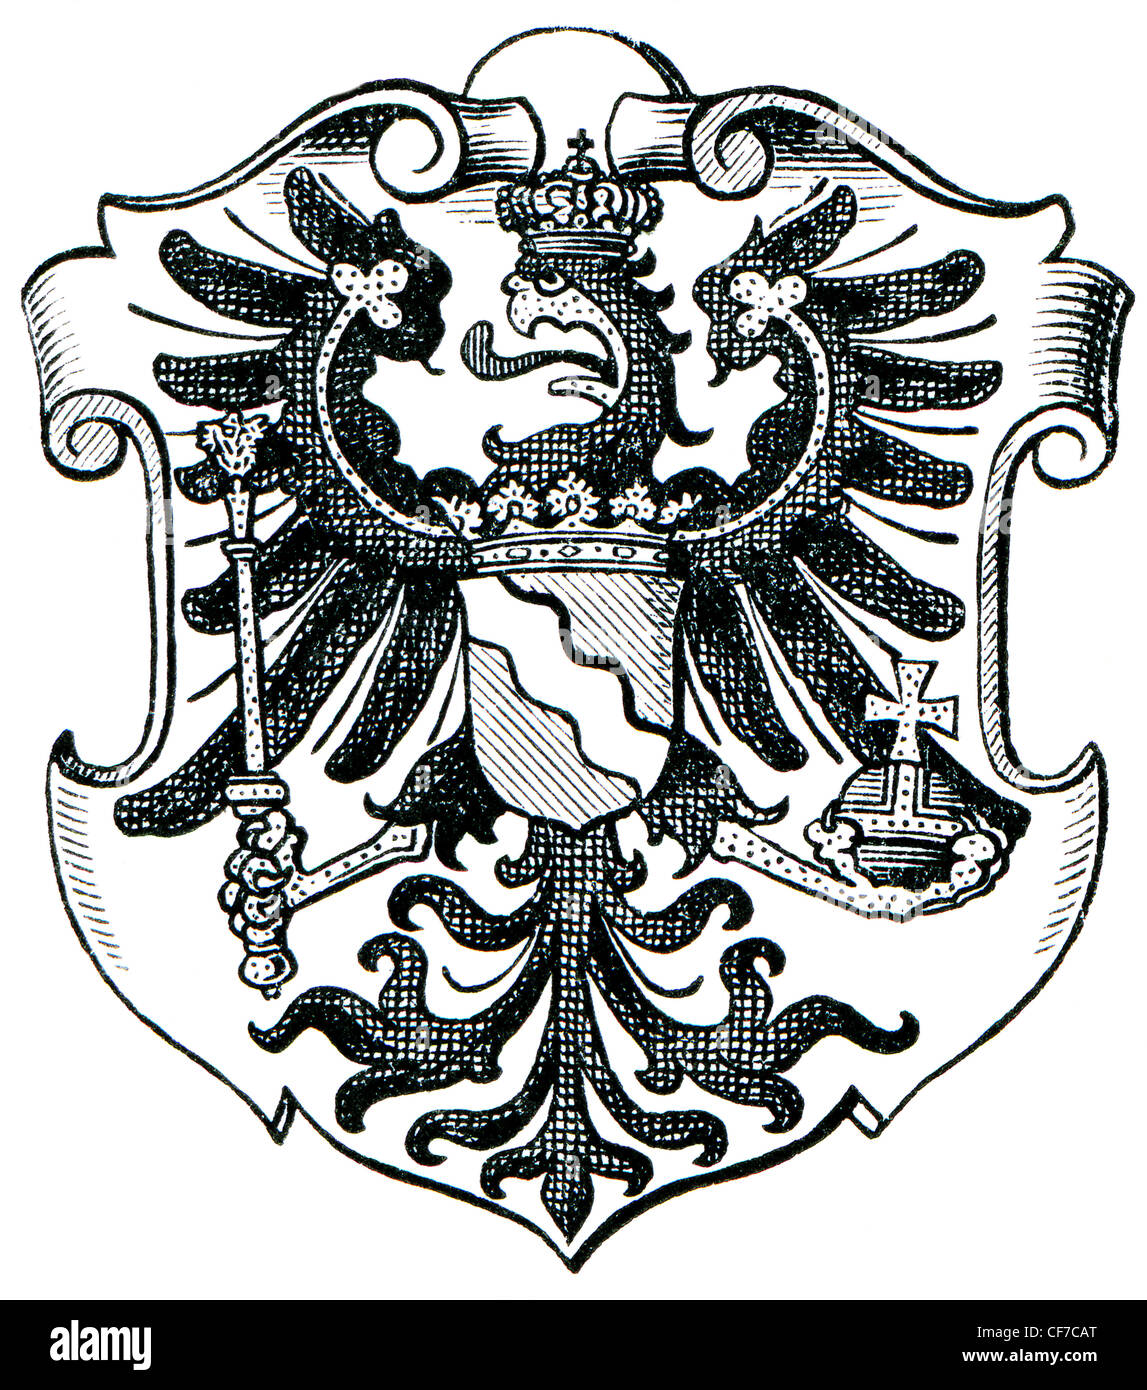 Coat of Arms Rhineland, (Province of Kingdom of Prussia). Stock Photo